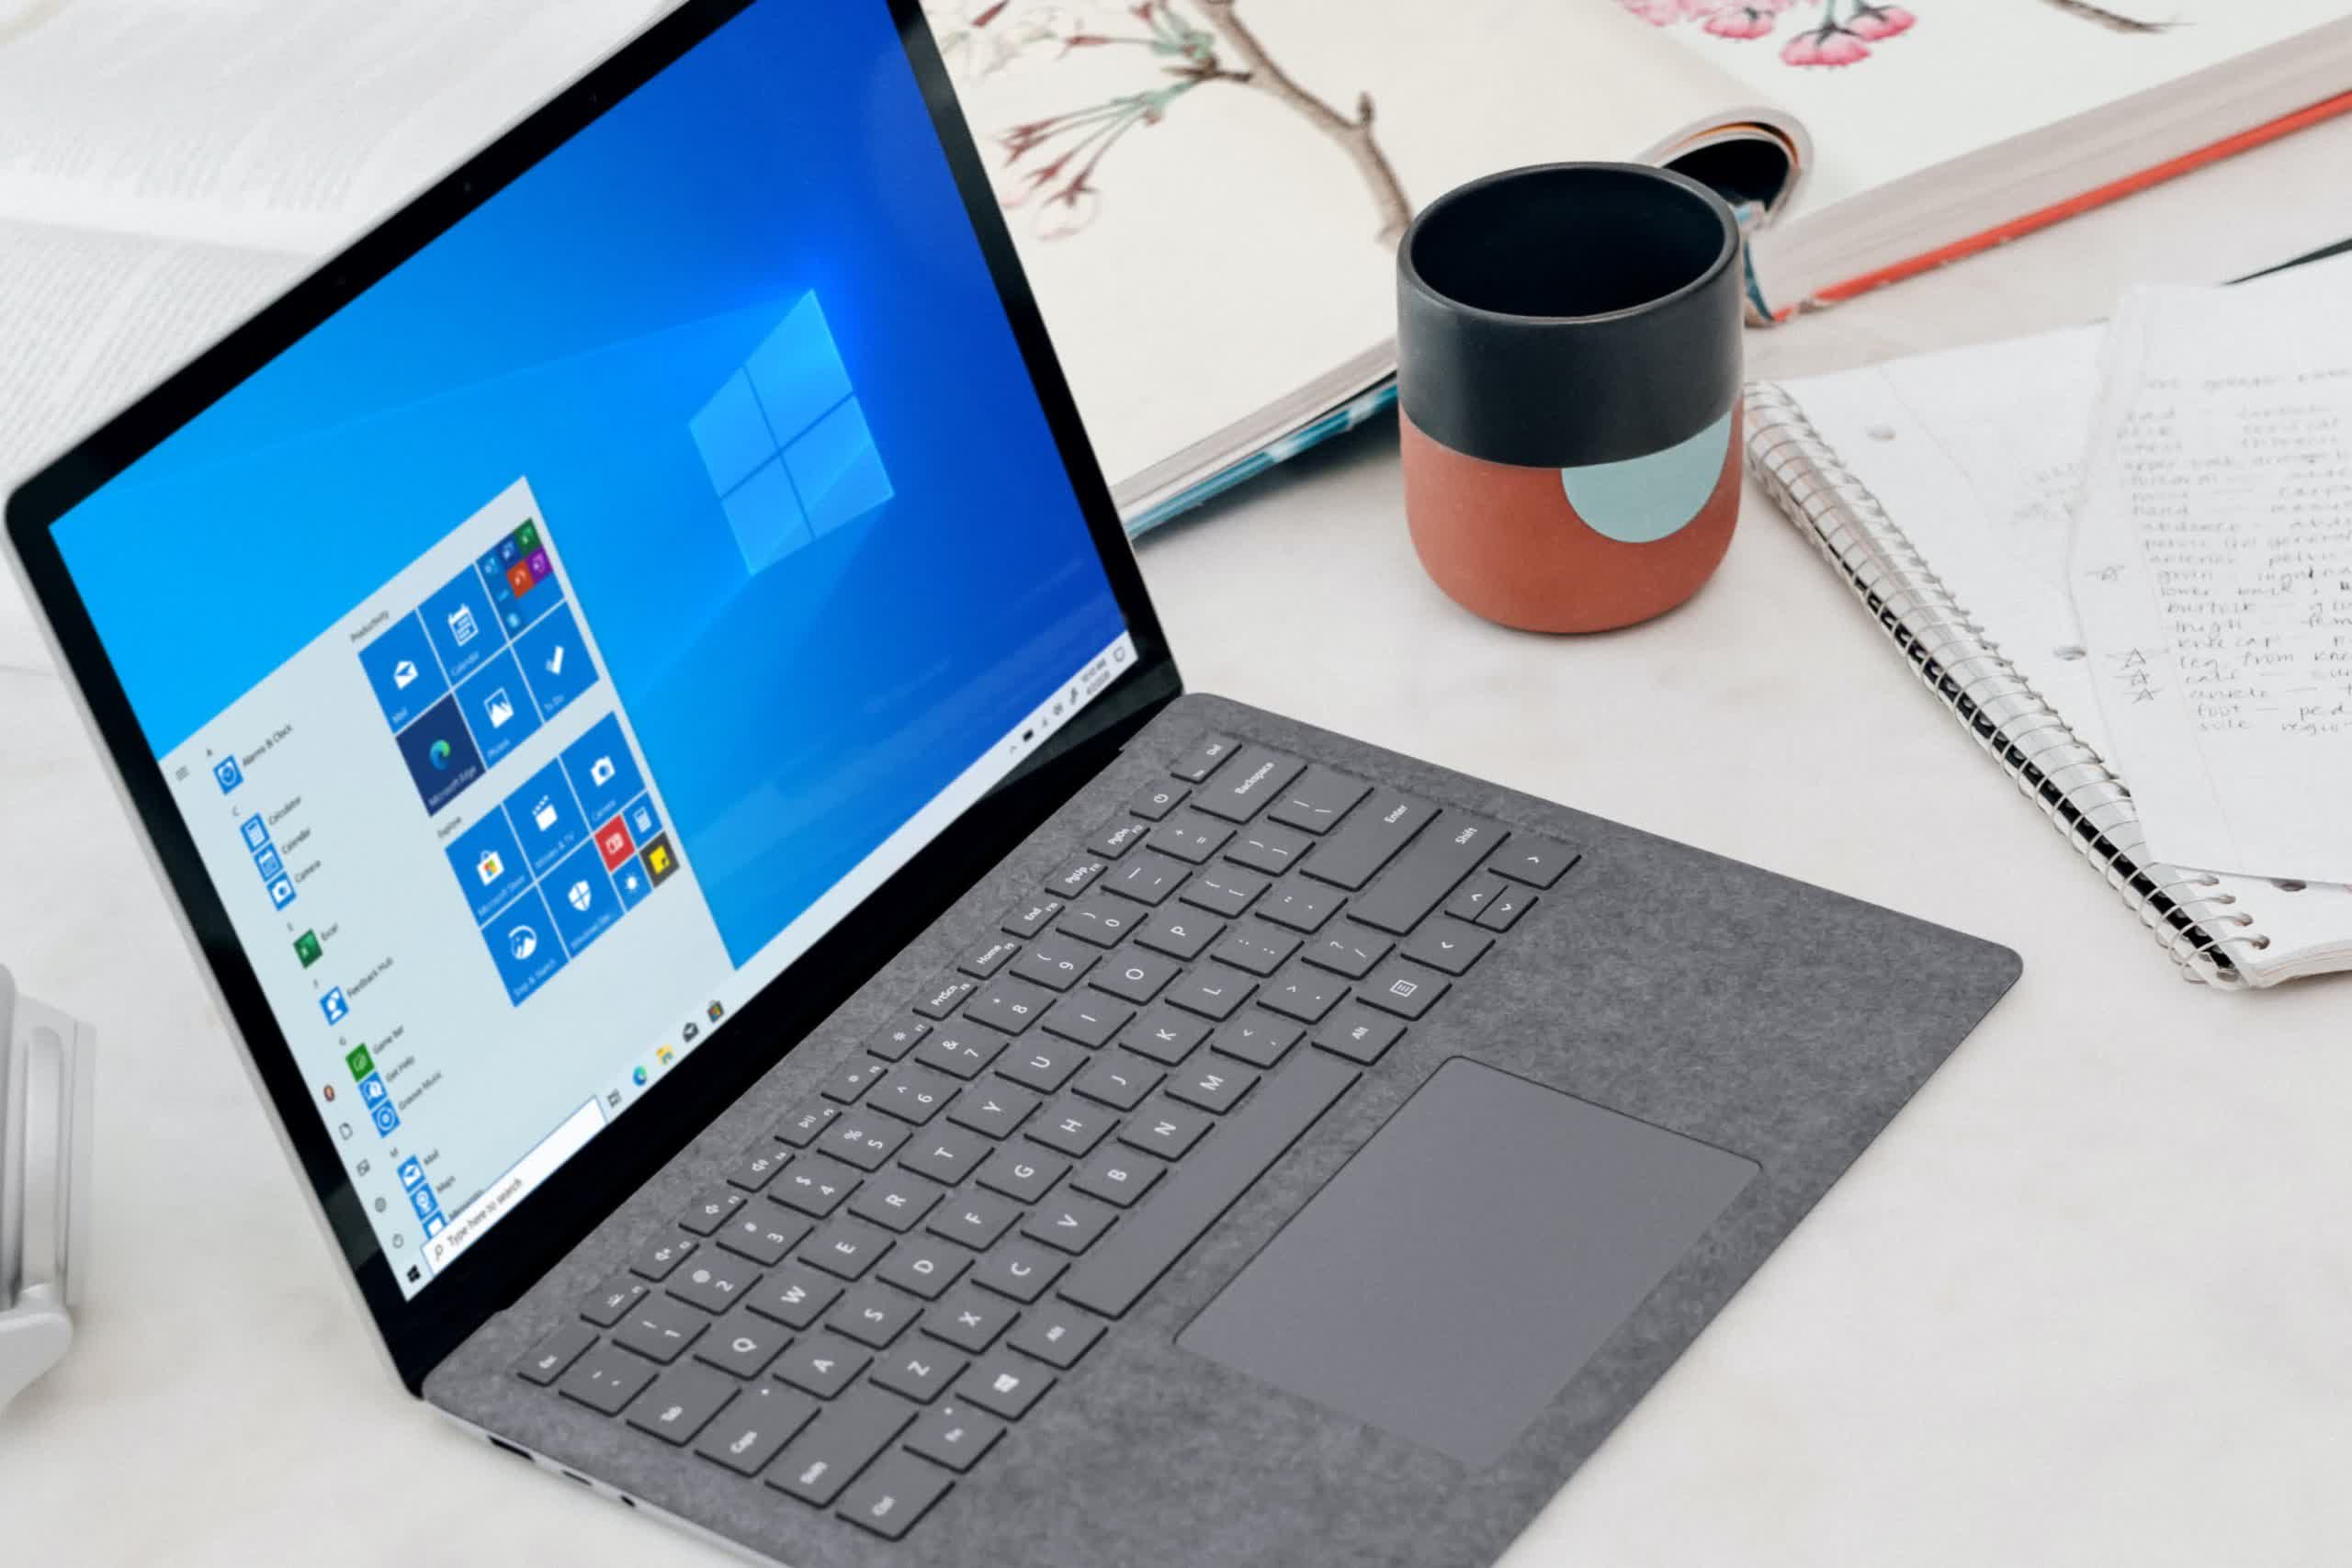 Both for $59: Upgrade to Windows 11 Pro and Microsoft Office Pro Plus for one price